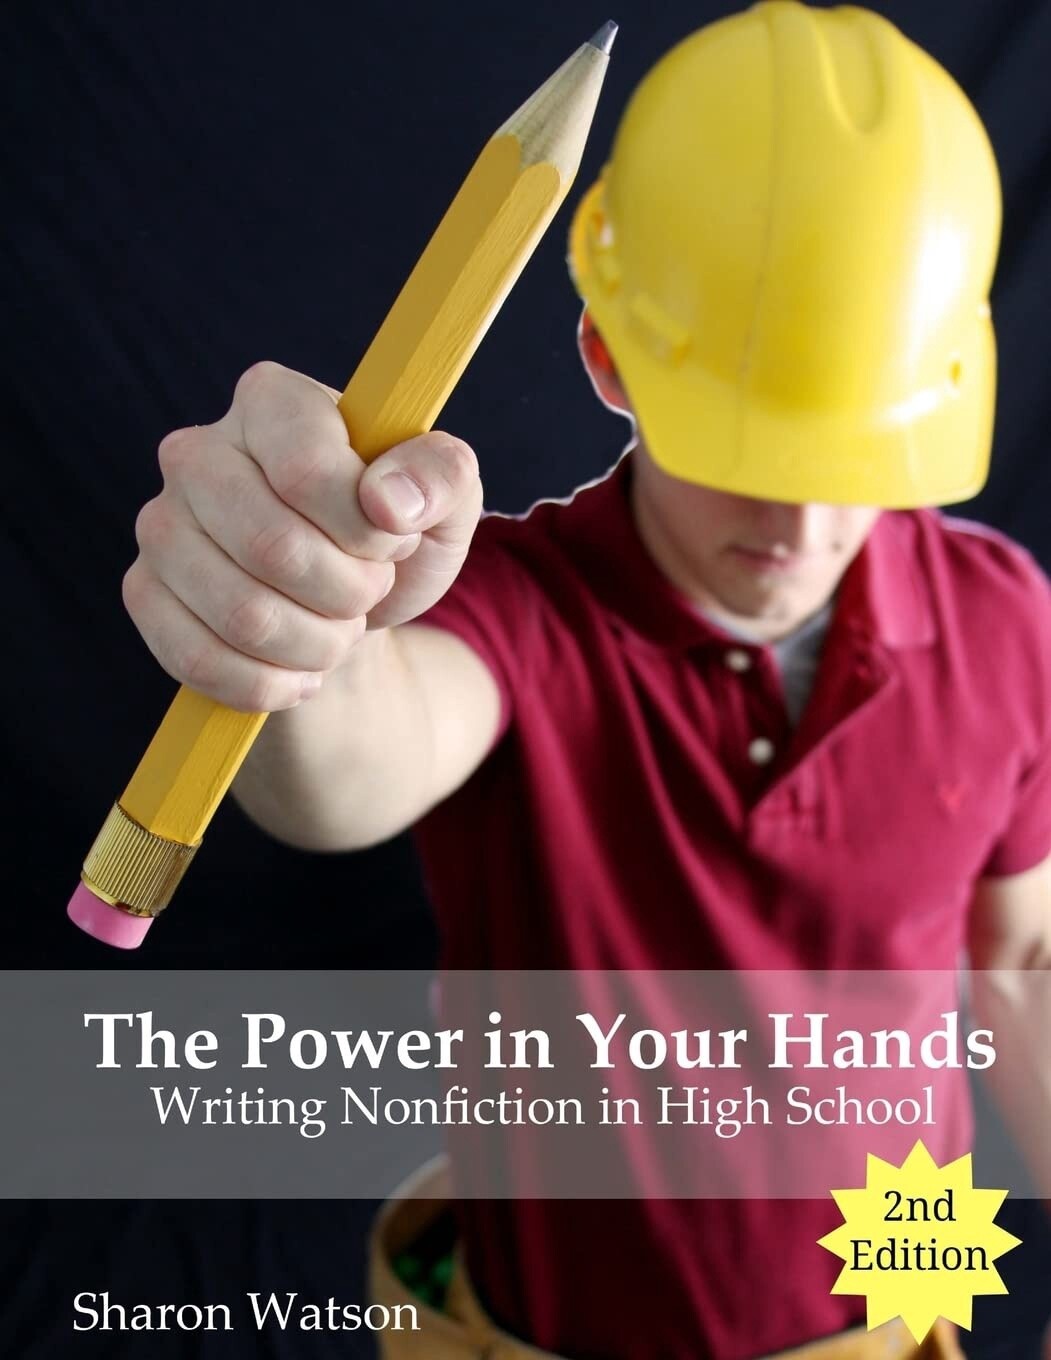 Used Power in Your Hands : Writing Nonfiction in High School 2nd Edition